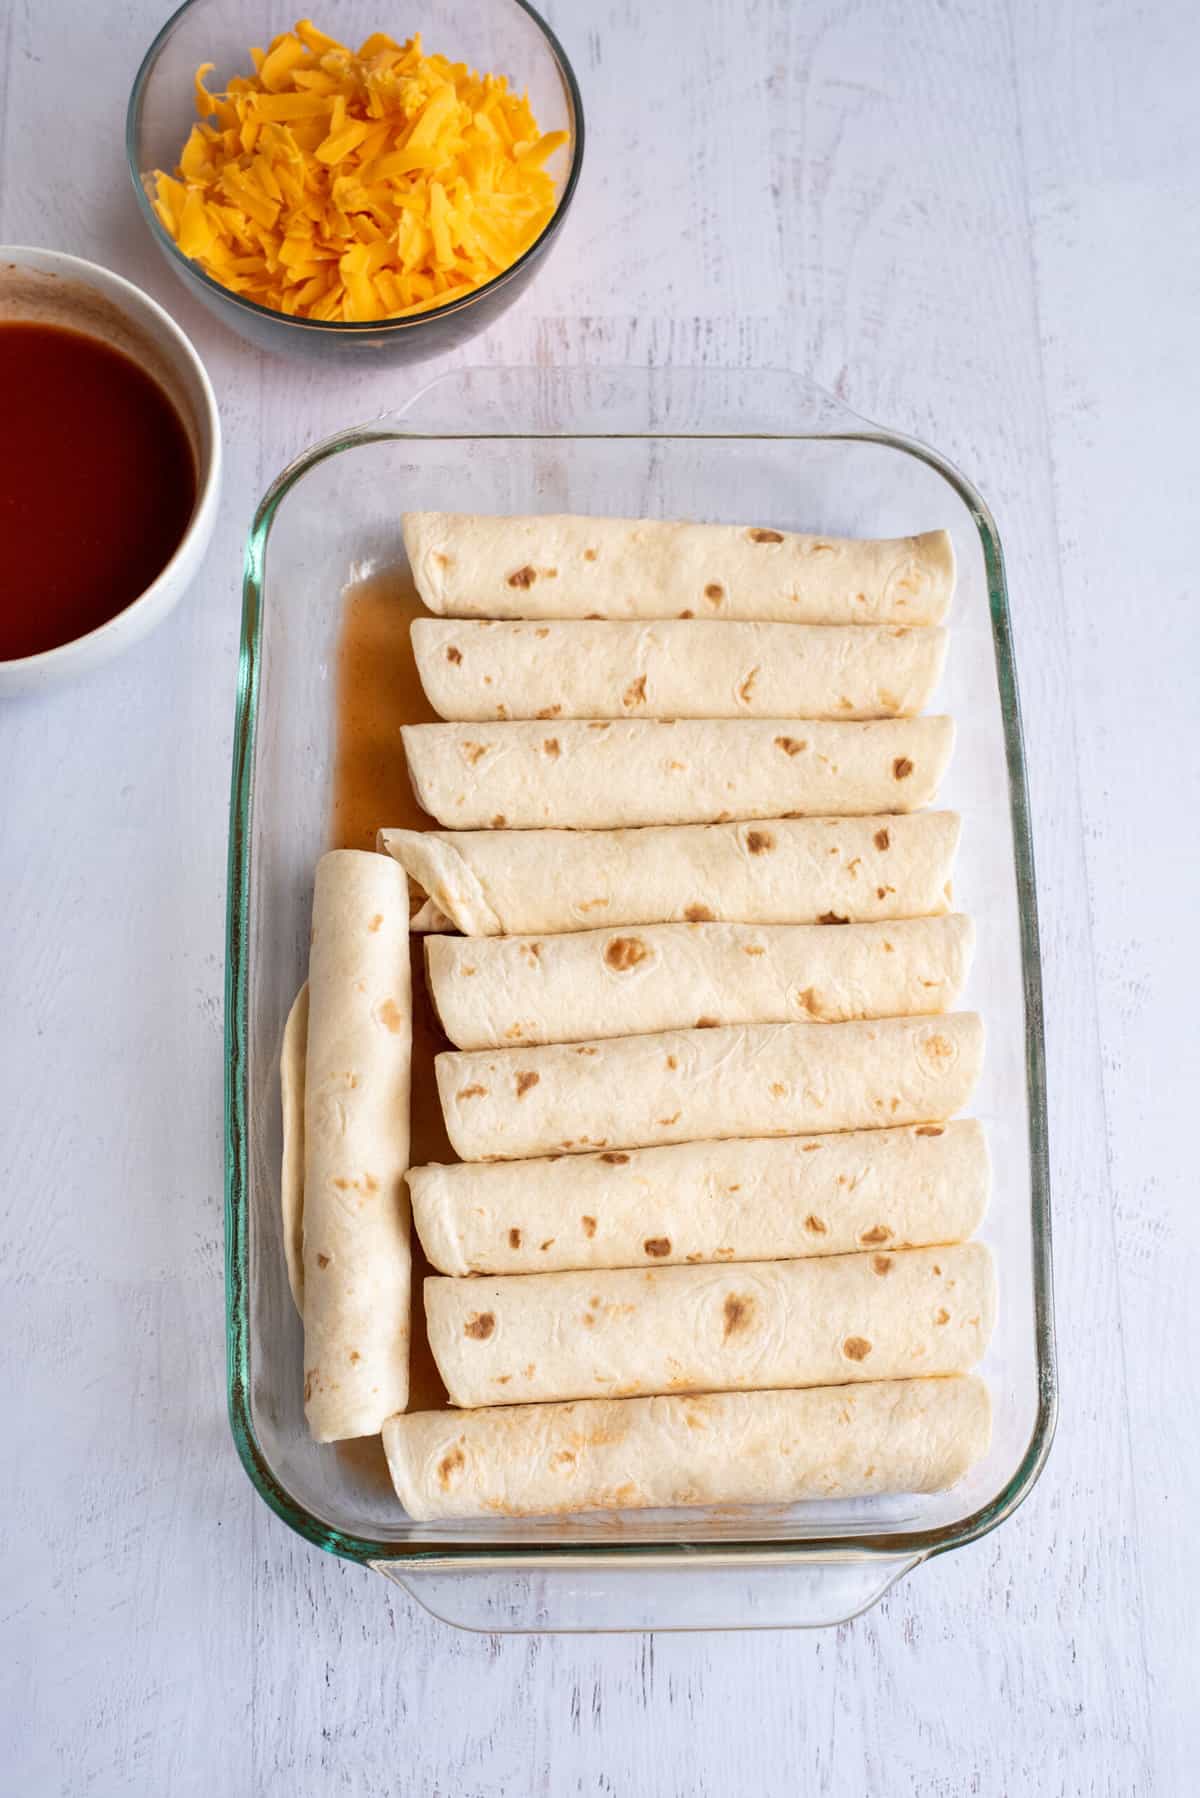 Rolled-up tortillas in baking dish.